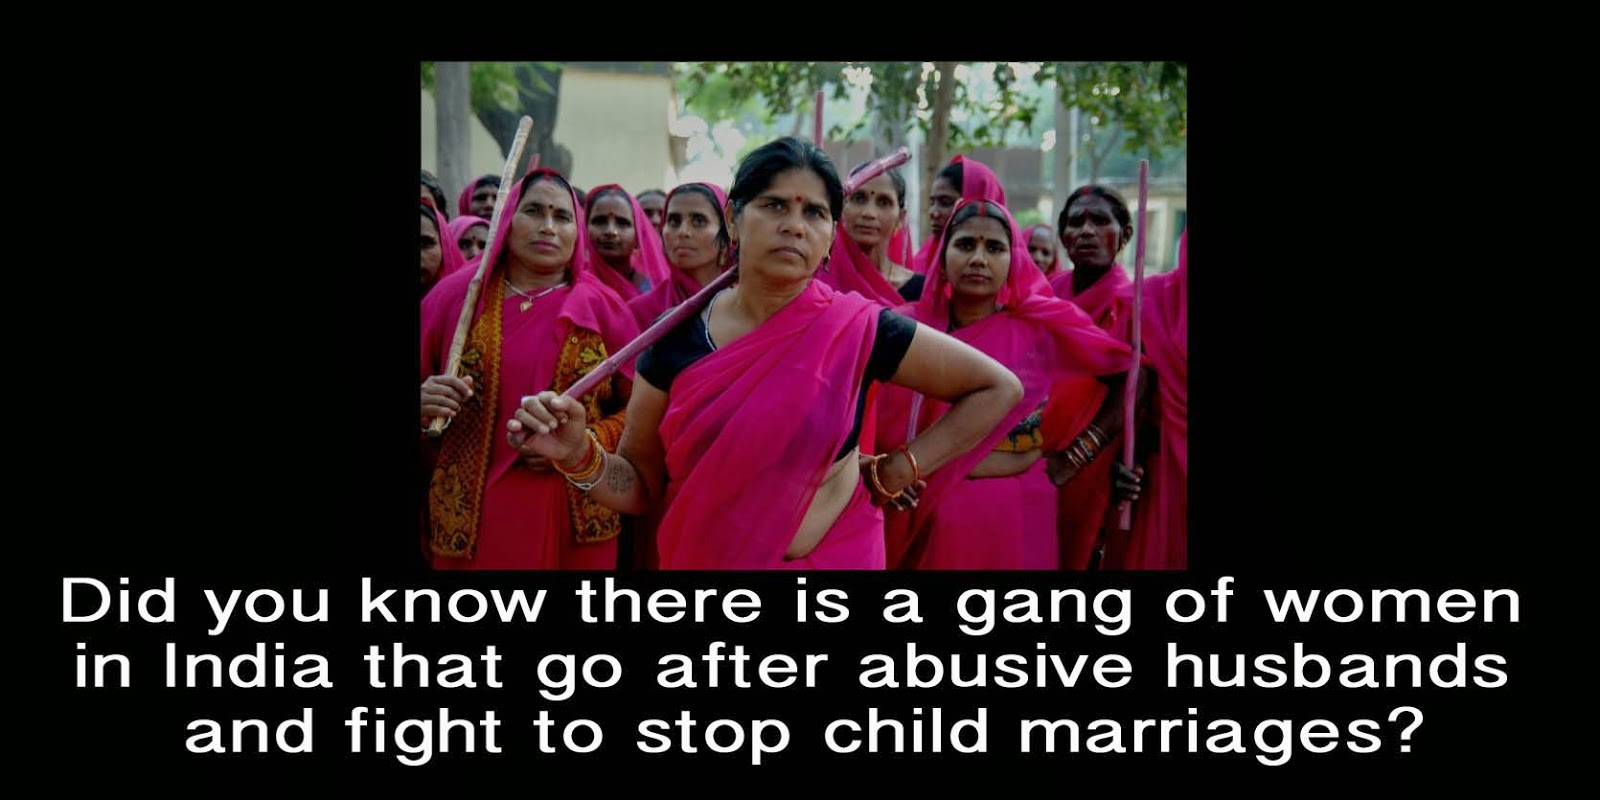 Meet India’s Gulabi Gang - Female Activists for Change - Did you know there is a gang of women in India that go after abusive husbands and fight to stop child marriages